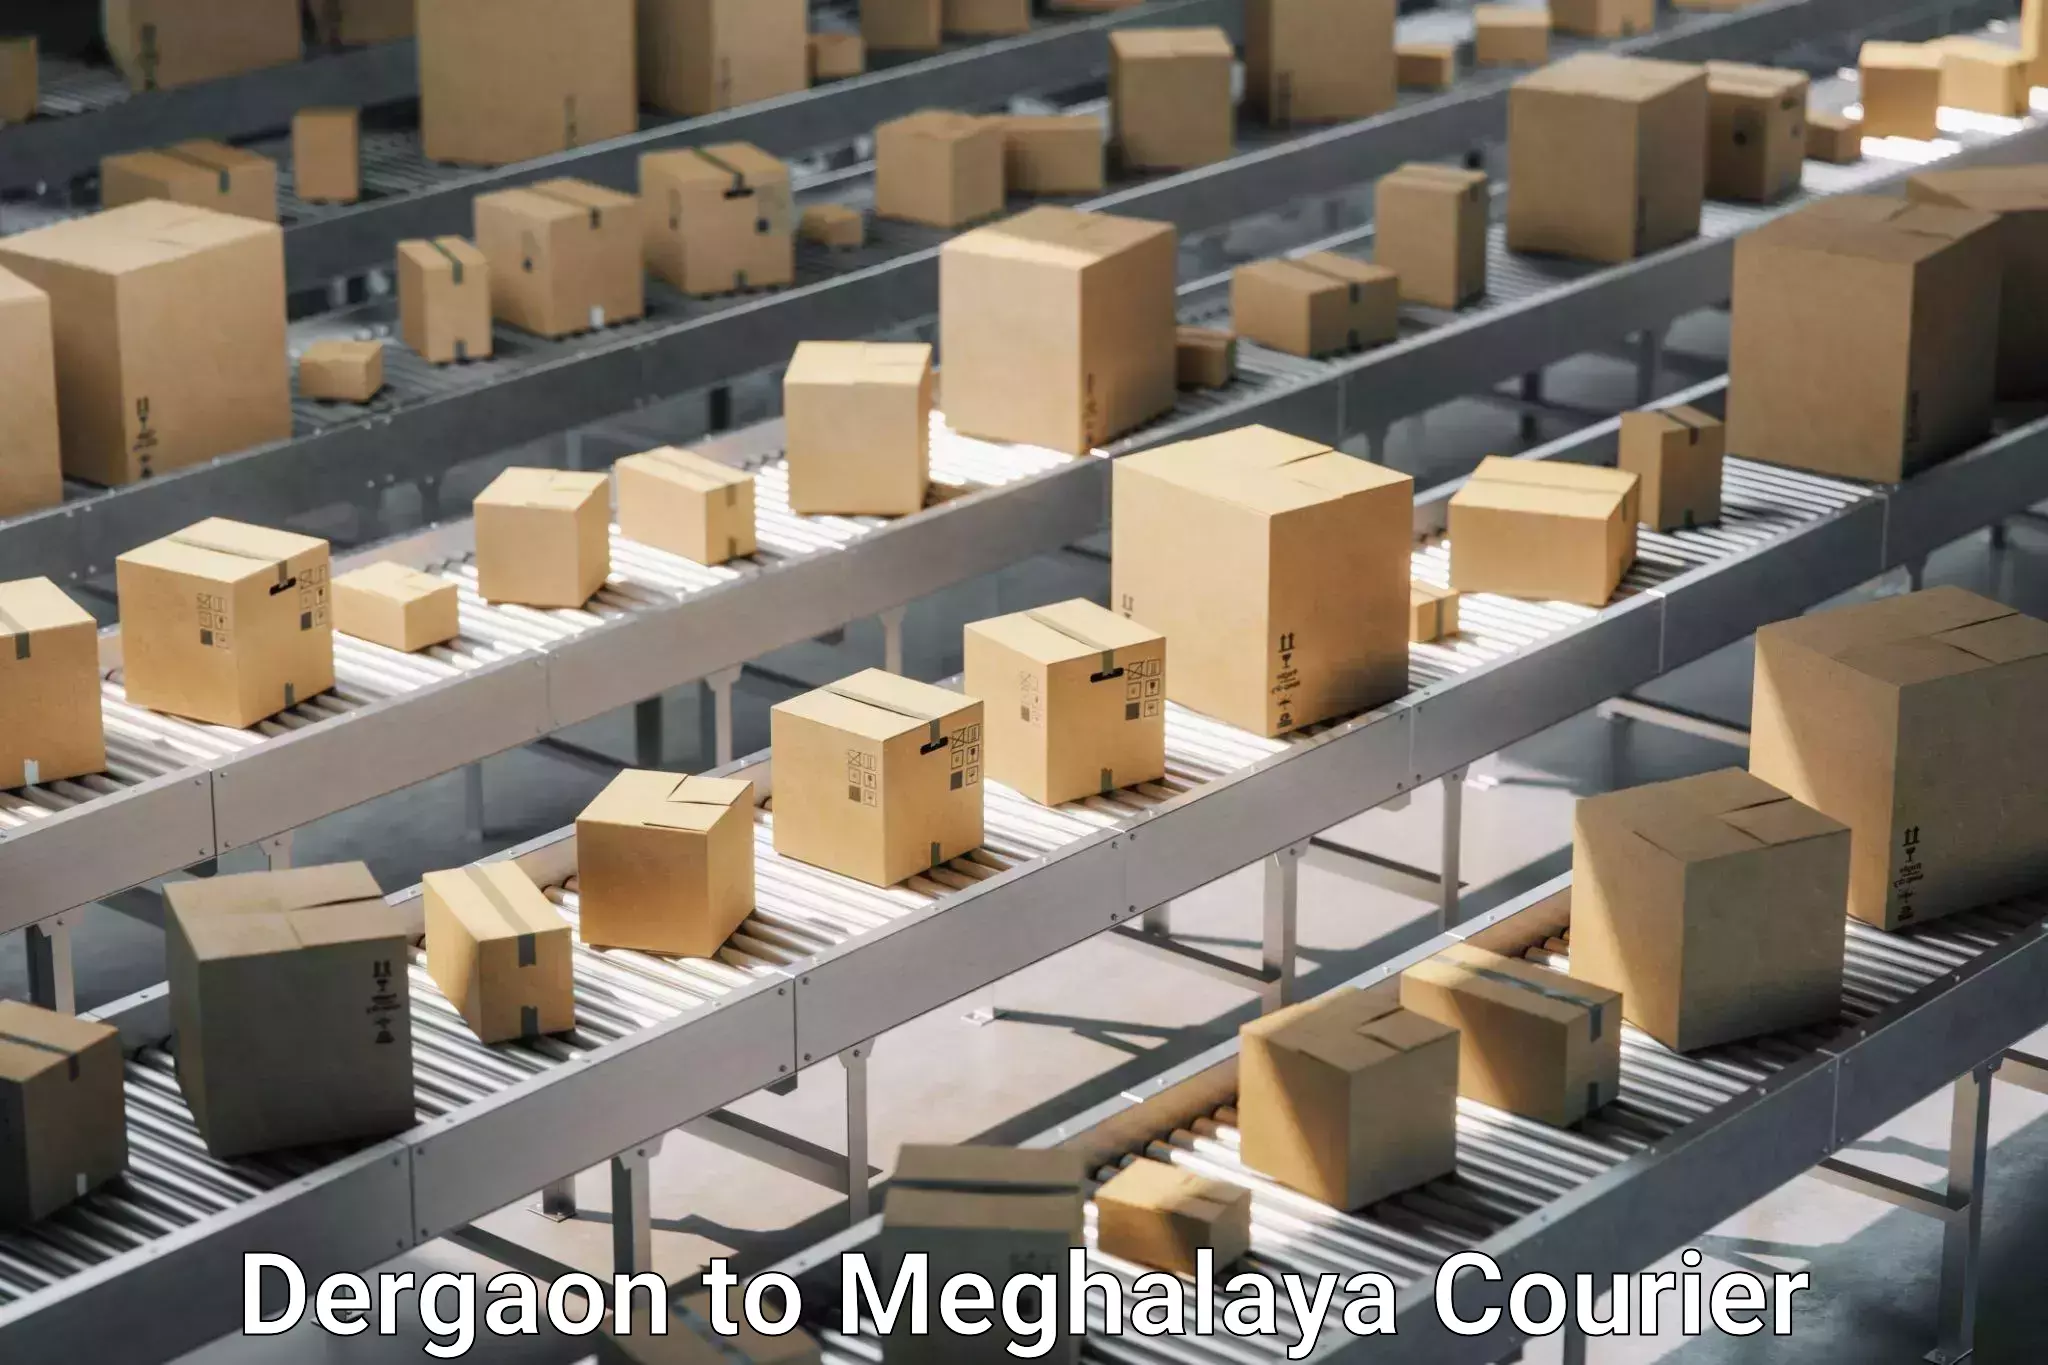 Trusted relocation experts Dergaon to Meghalaya